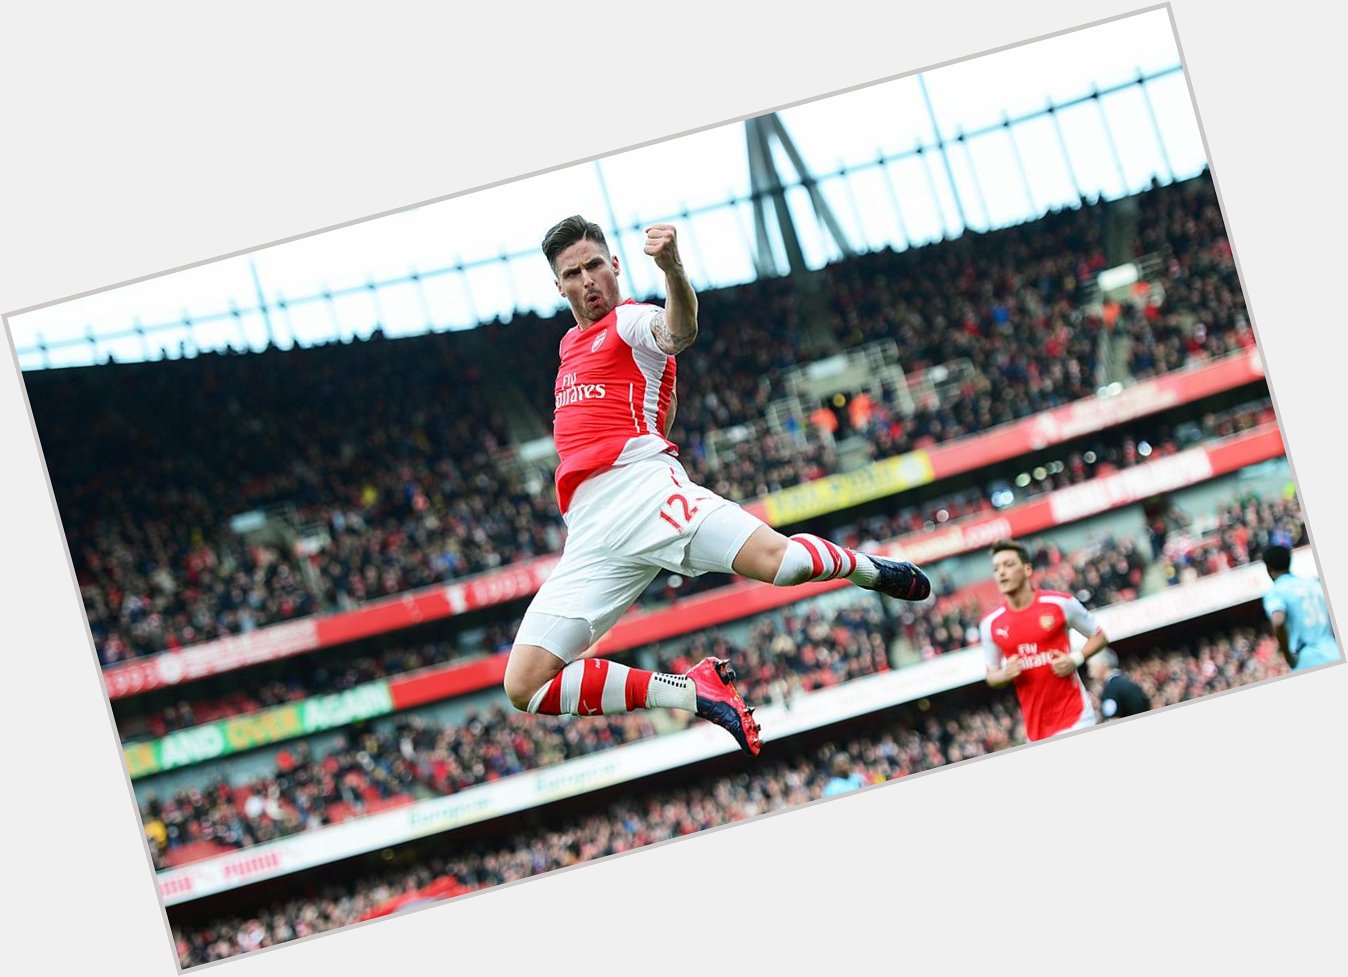 Happy birthday to Arsenal and France forward Olivier Giroud, who turns 29 today. 